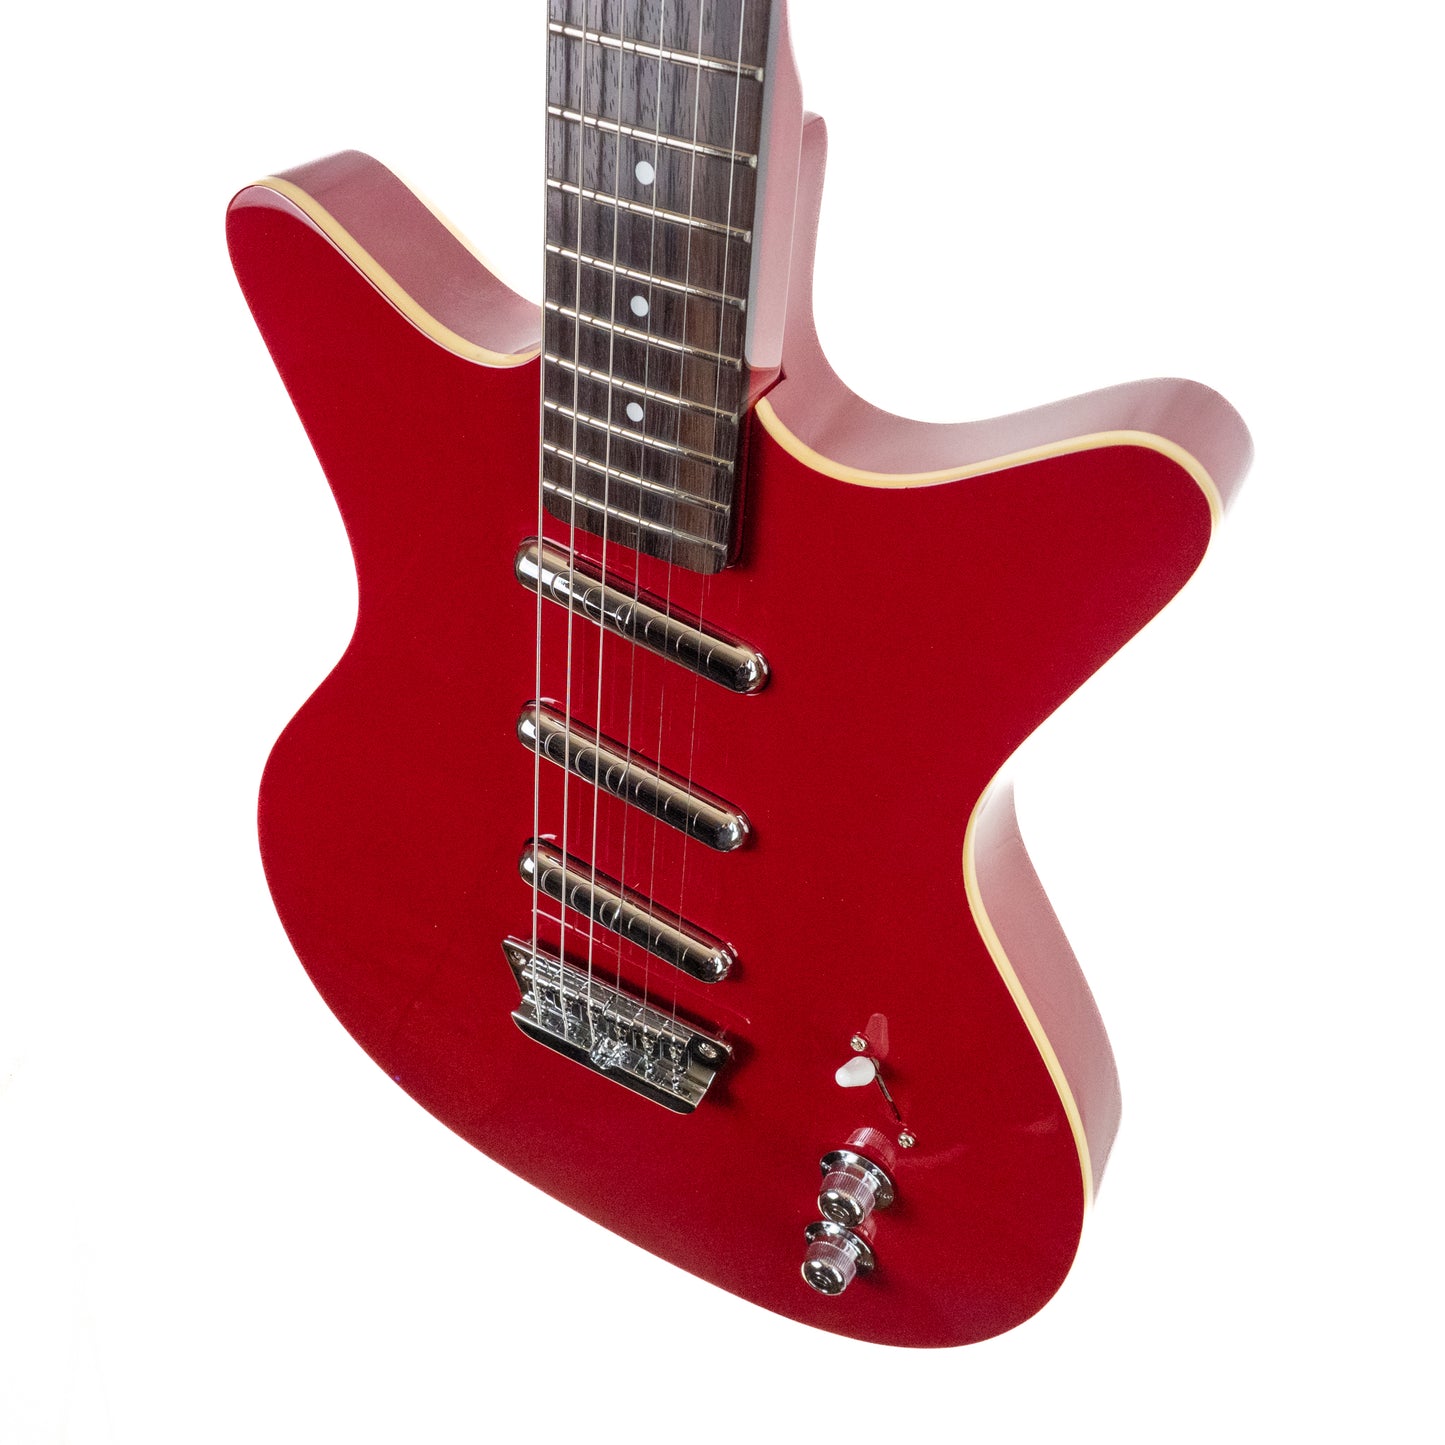 Danelectro 59 Triple Divine 3-lipstick pickup red only 6 lbs, 3 oz, new model!